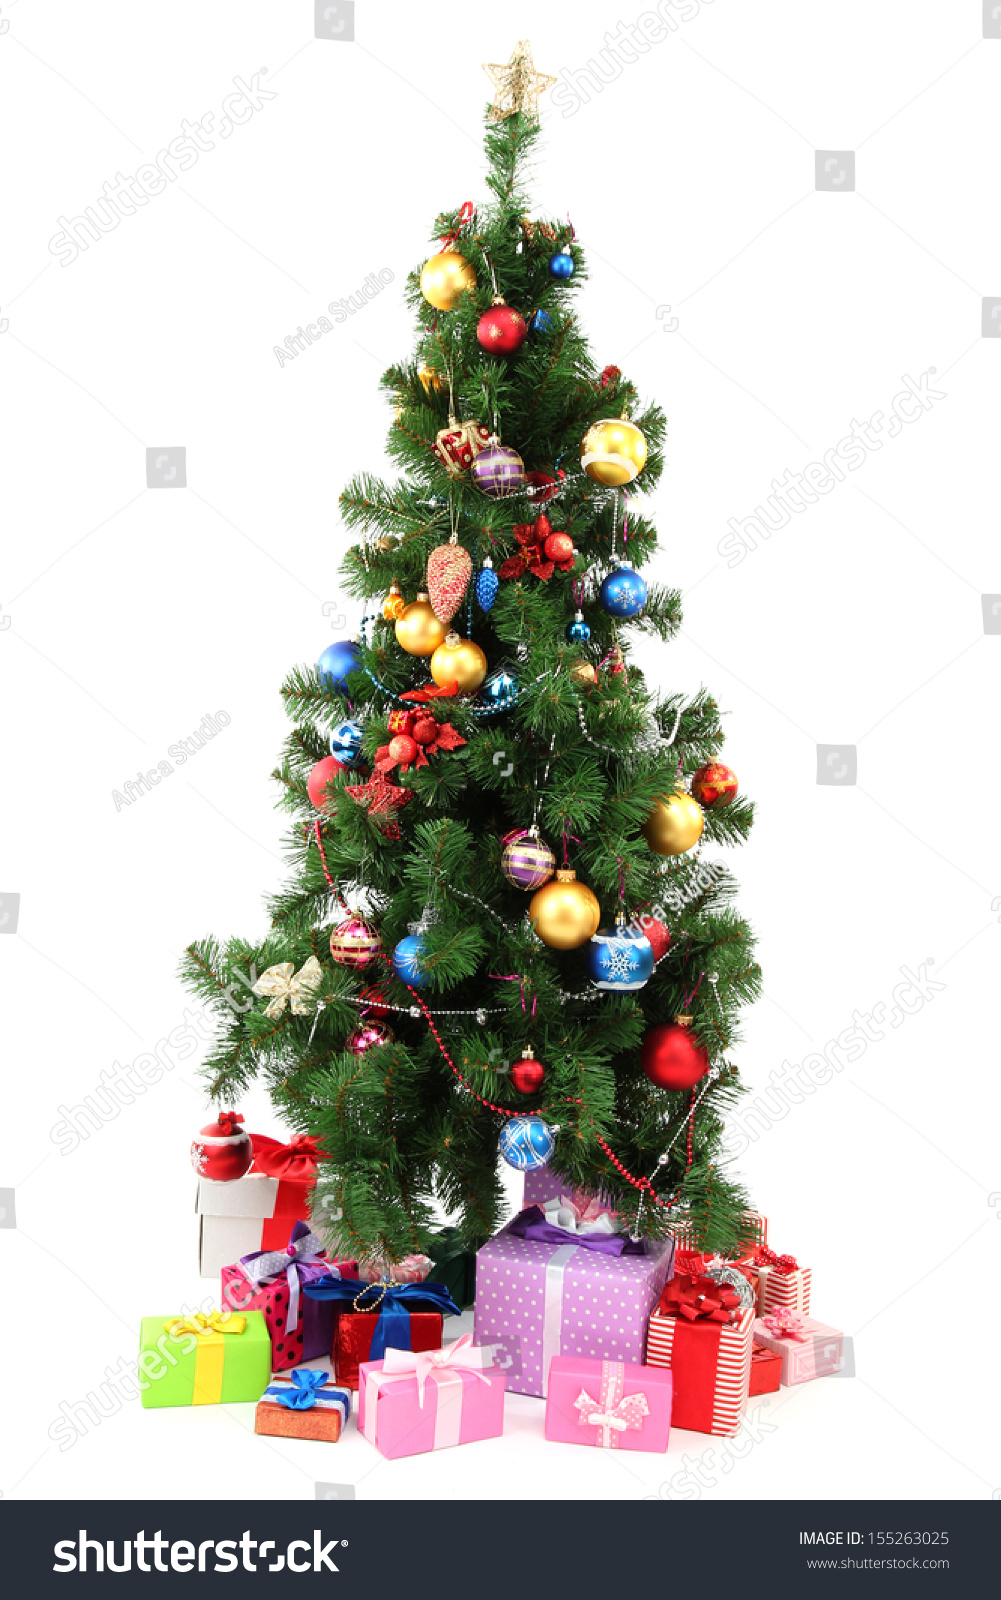 Decorated Christmas Tree Gifts Isolated On Stock Photo 155263025 ...